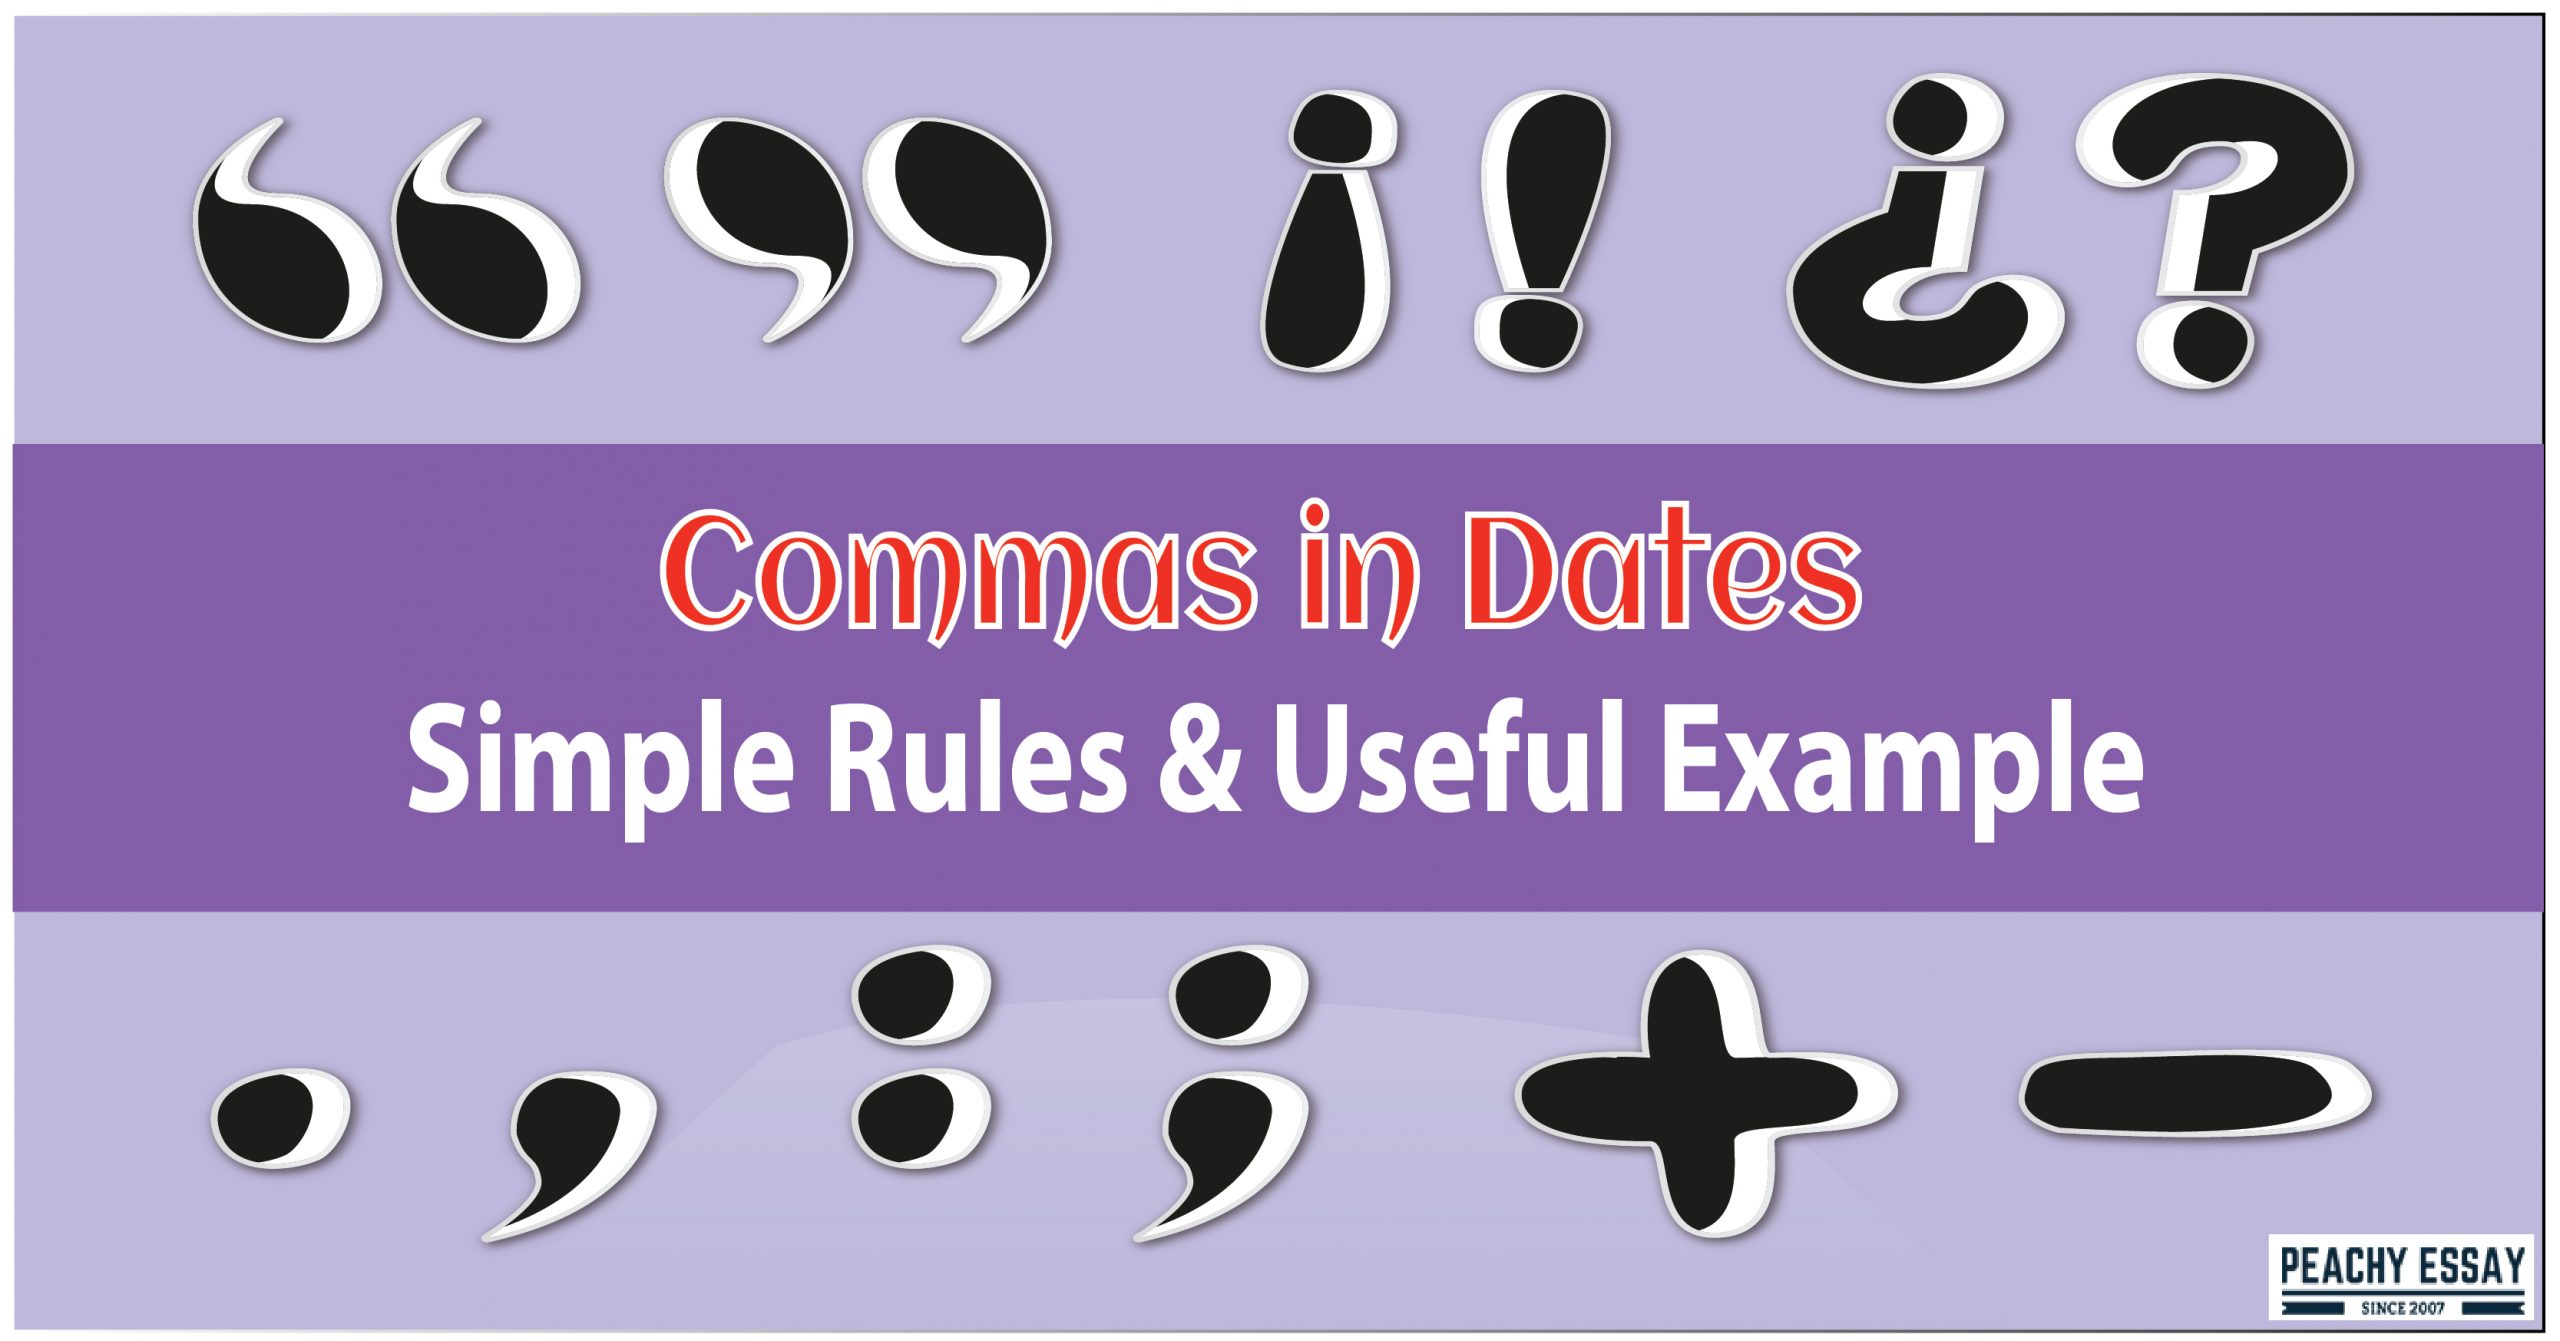 commas-in-dates-simple-rules-useful-example